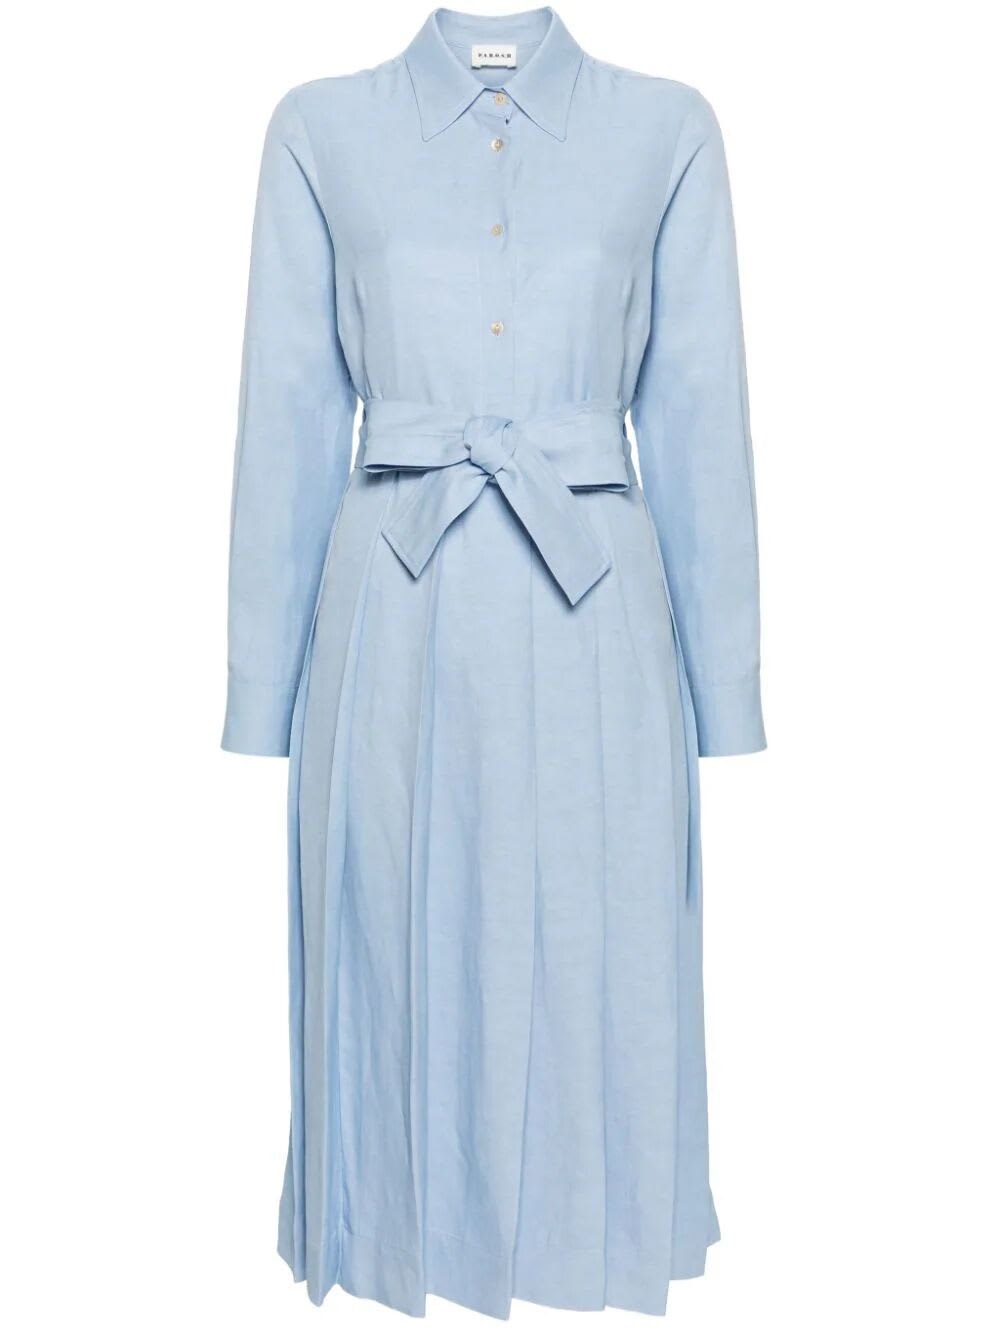 Shop P.a.r.o.s.h Long Sleeves Chemisier Dress In Light Blue Dust